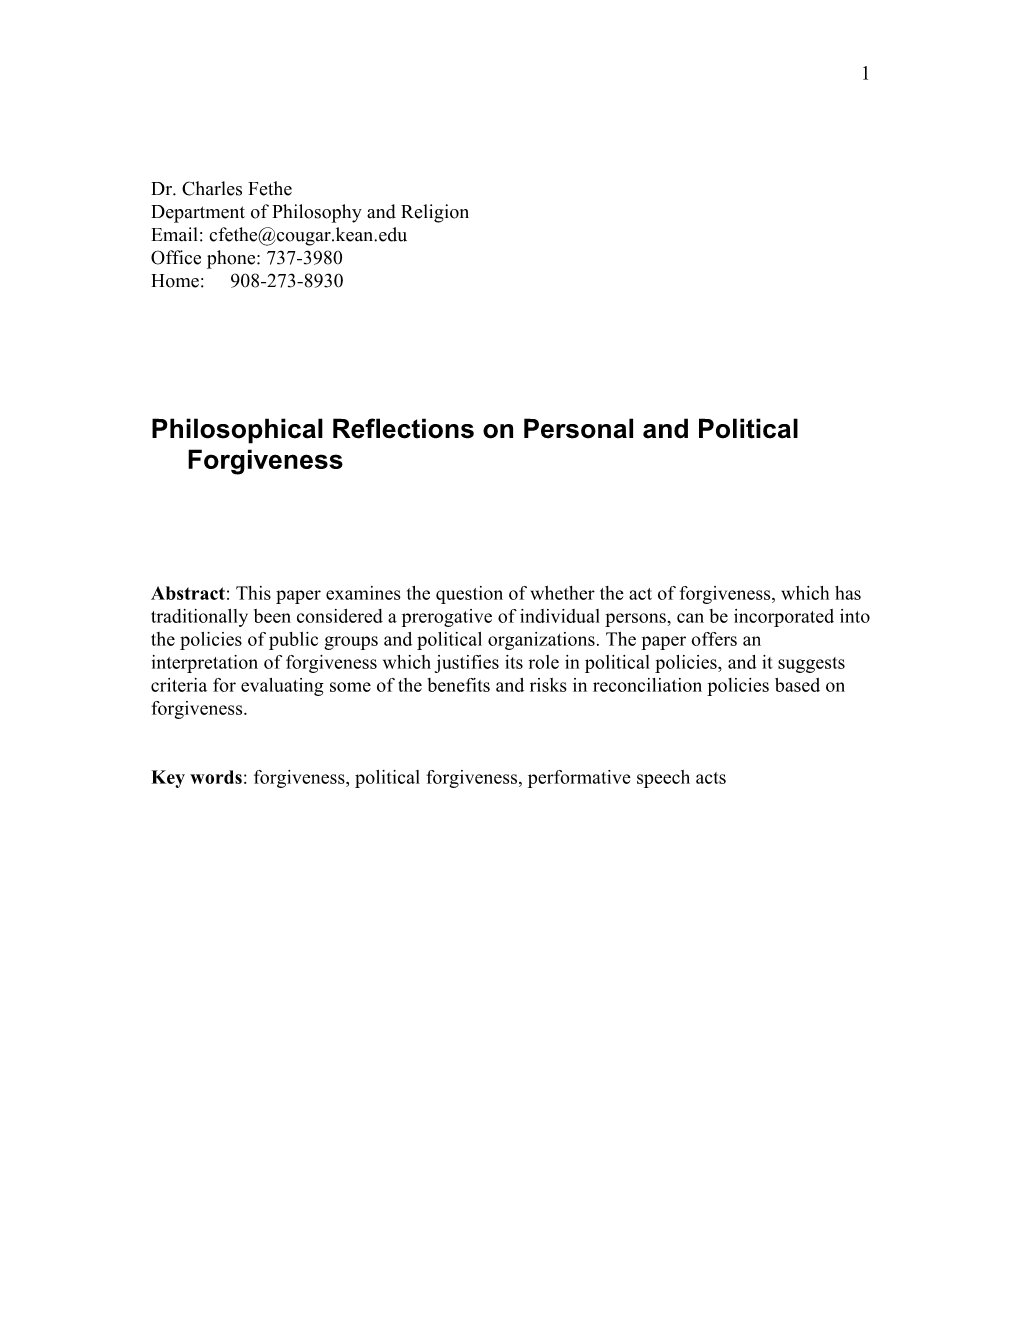 Philosophical Reflections on Personal and Political Forgiveness